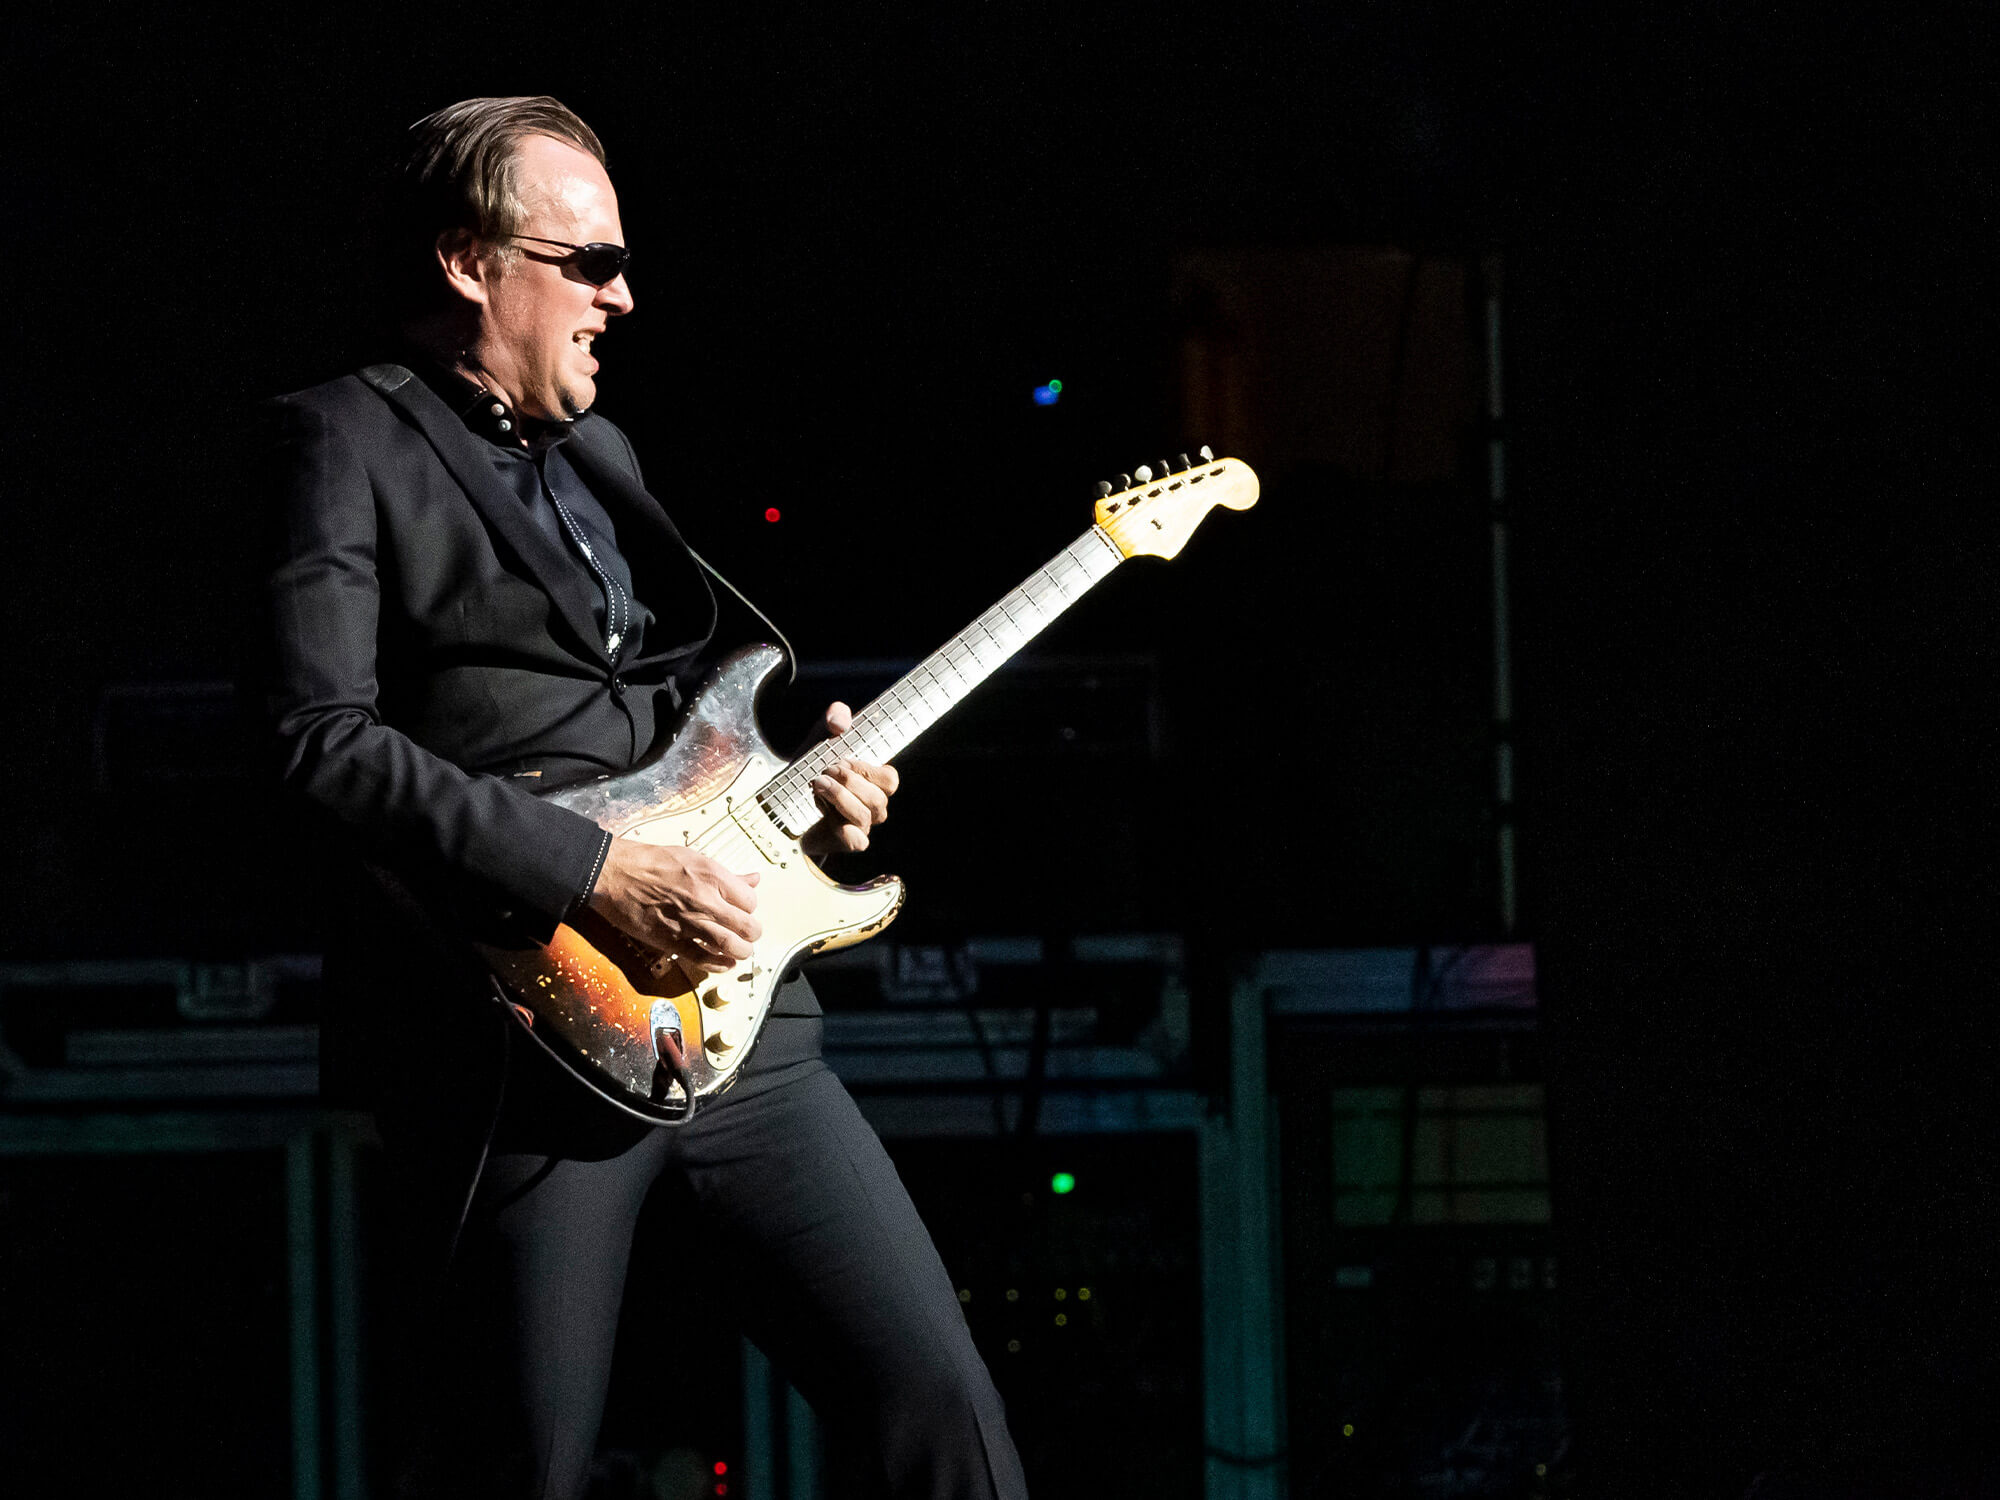 Joe Bonamassa on stage playing a Strat. He stands before a black backdrop and wears his famous suit and sunglasses